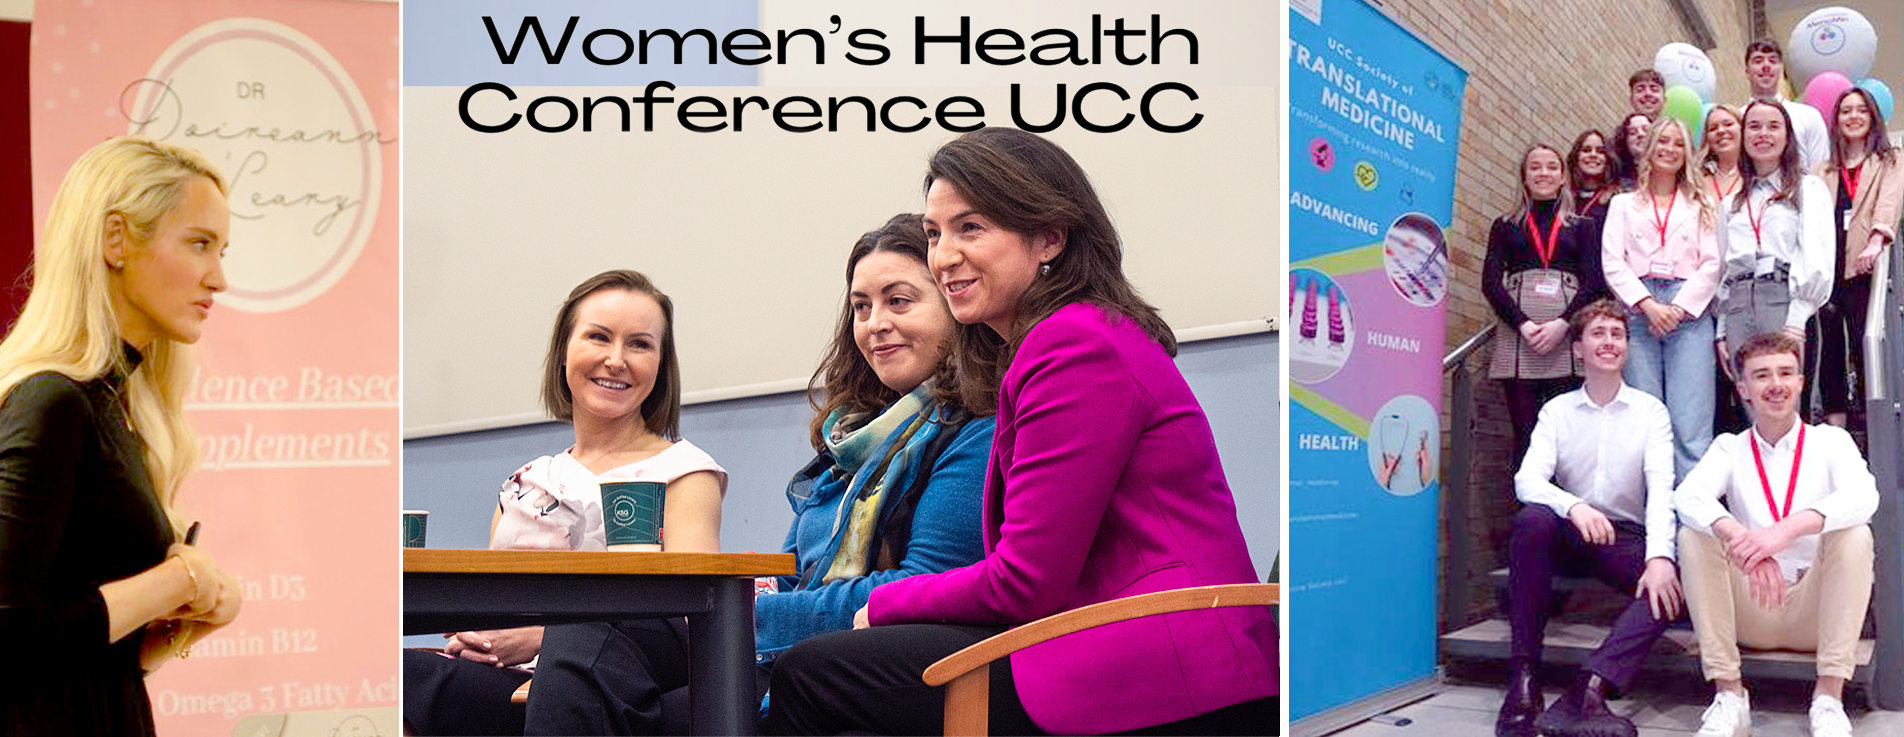 UCC BSc Medical and Health Sciences students Translational Medicine Society host Women's Health Conference in UCC